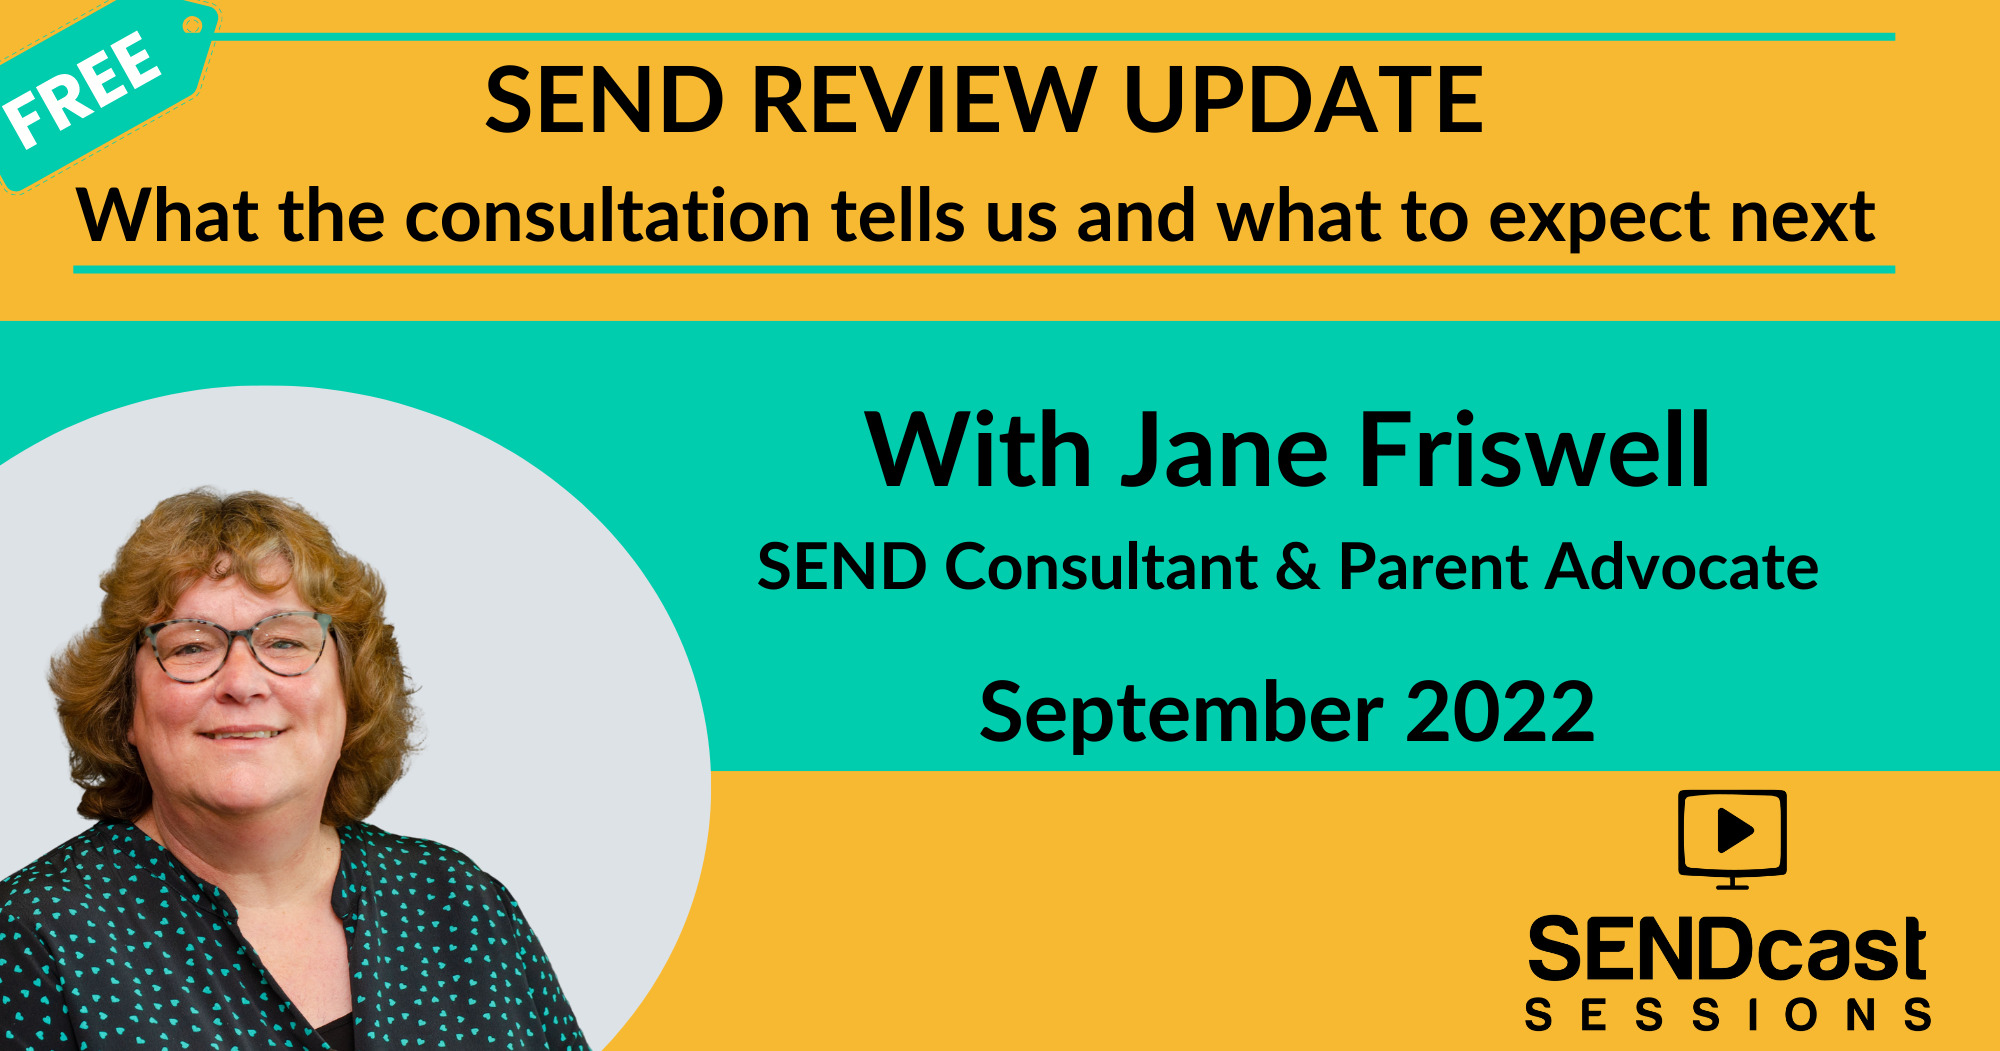 SEND Review Update with Jane Friswell